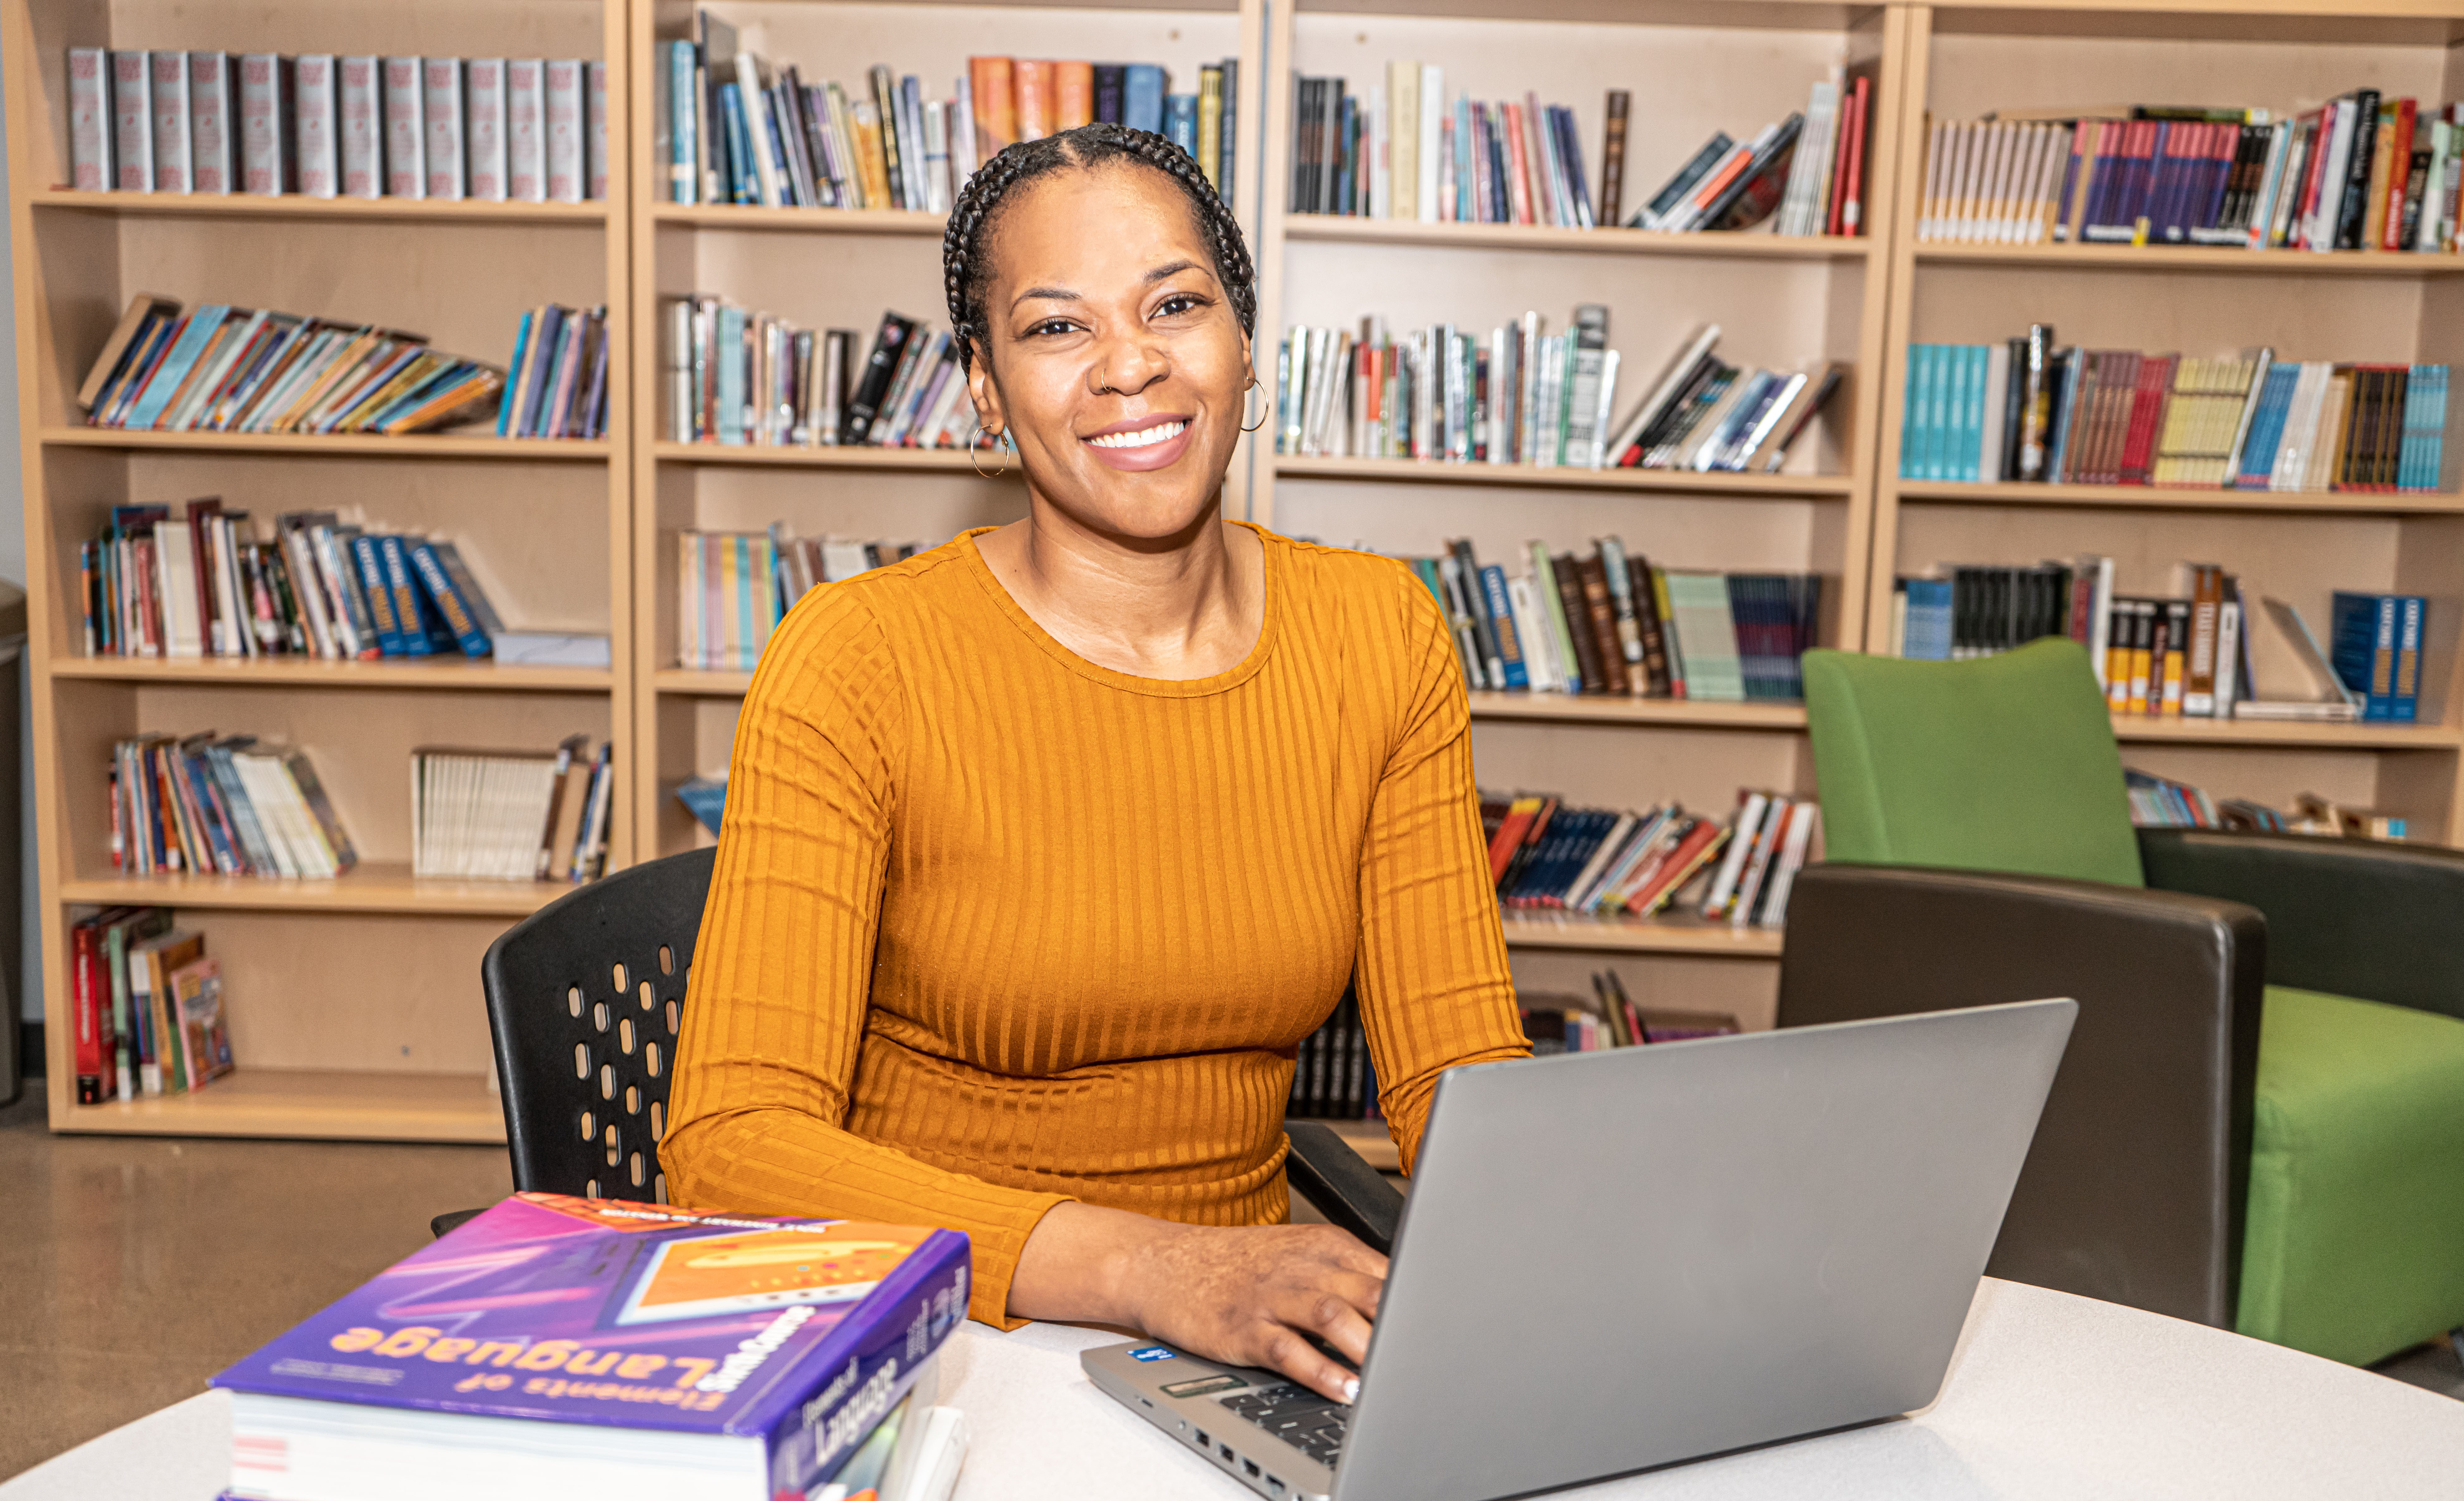 Person in a fitted sweater sitting at a library table working on a laptop and smiling.